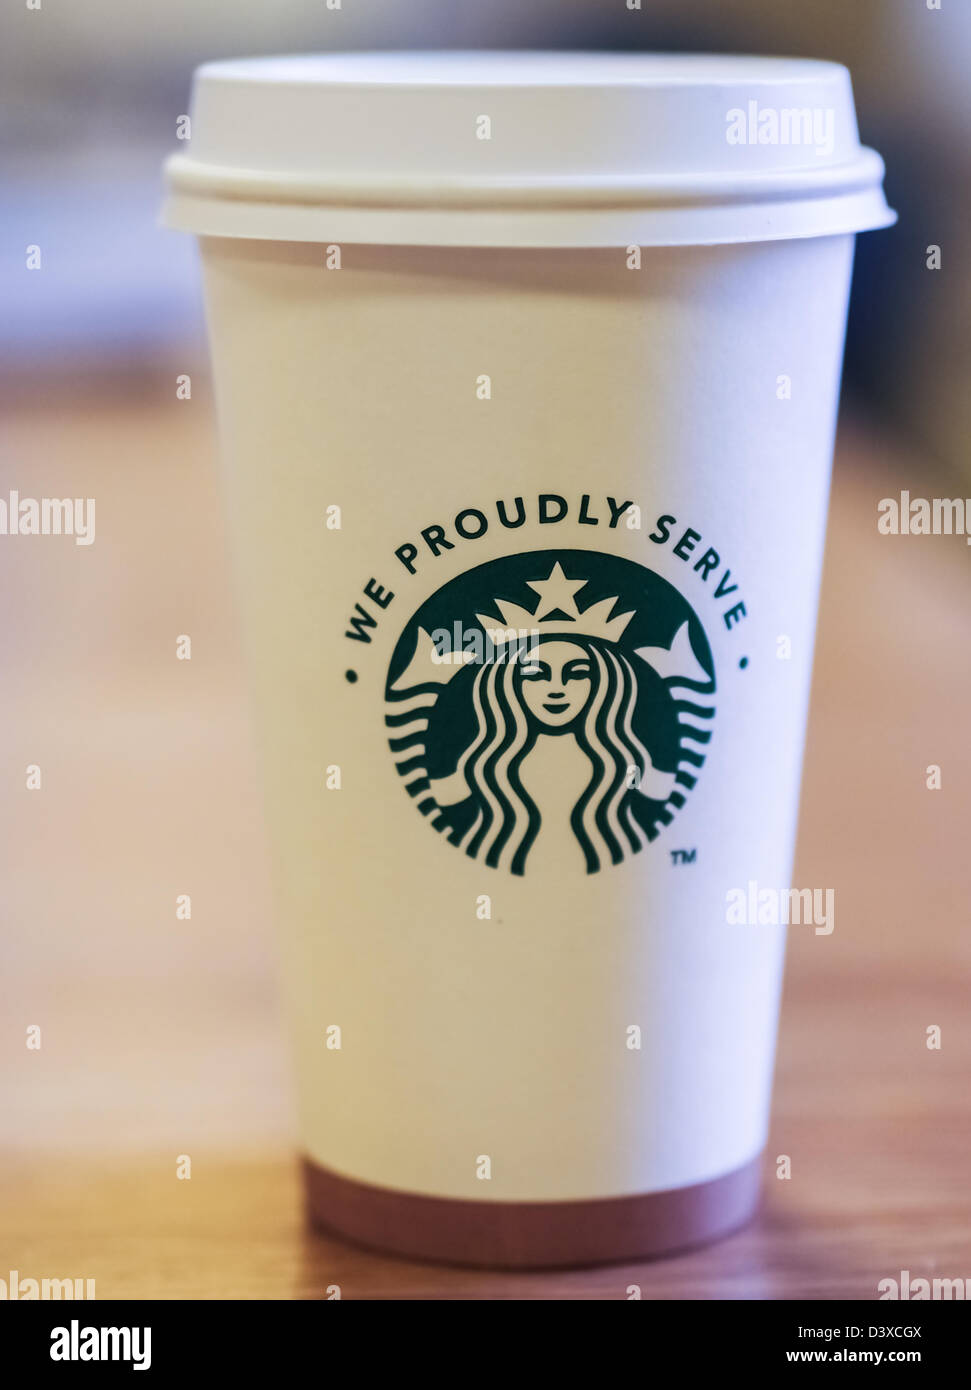 Starbucks coffee cup from a licensed vendor Stock Photo